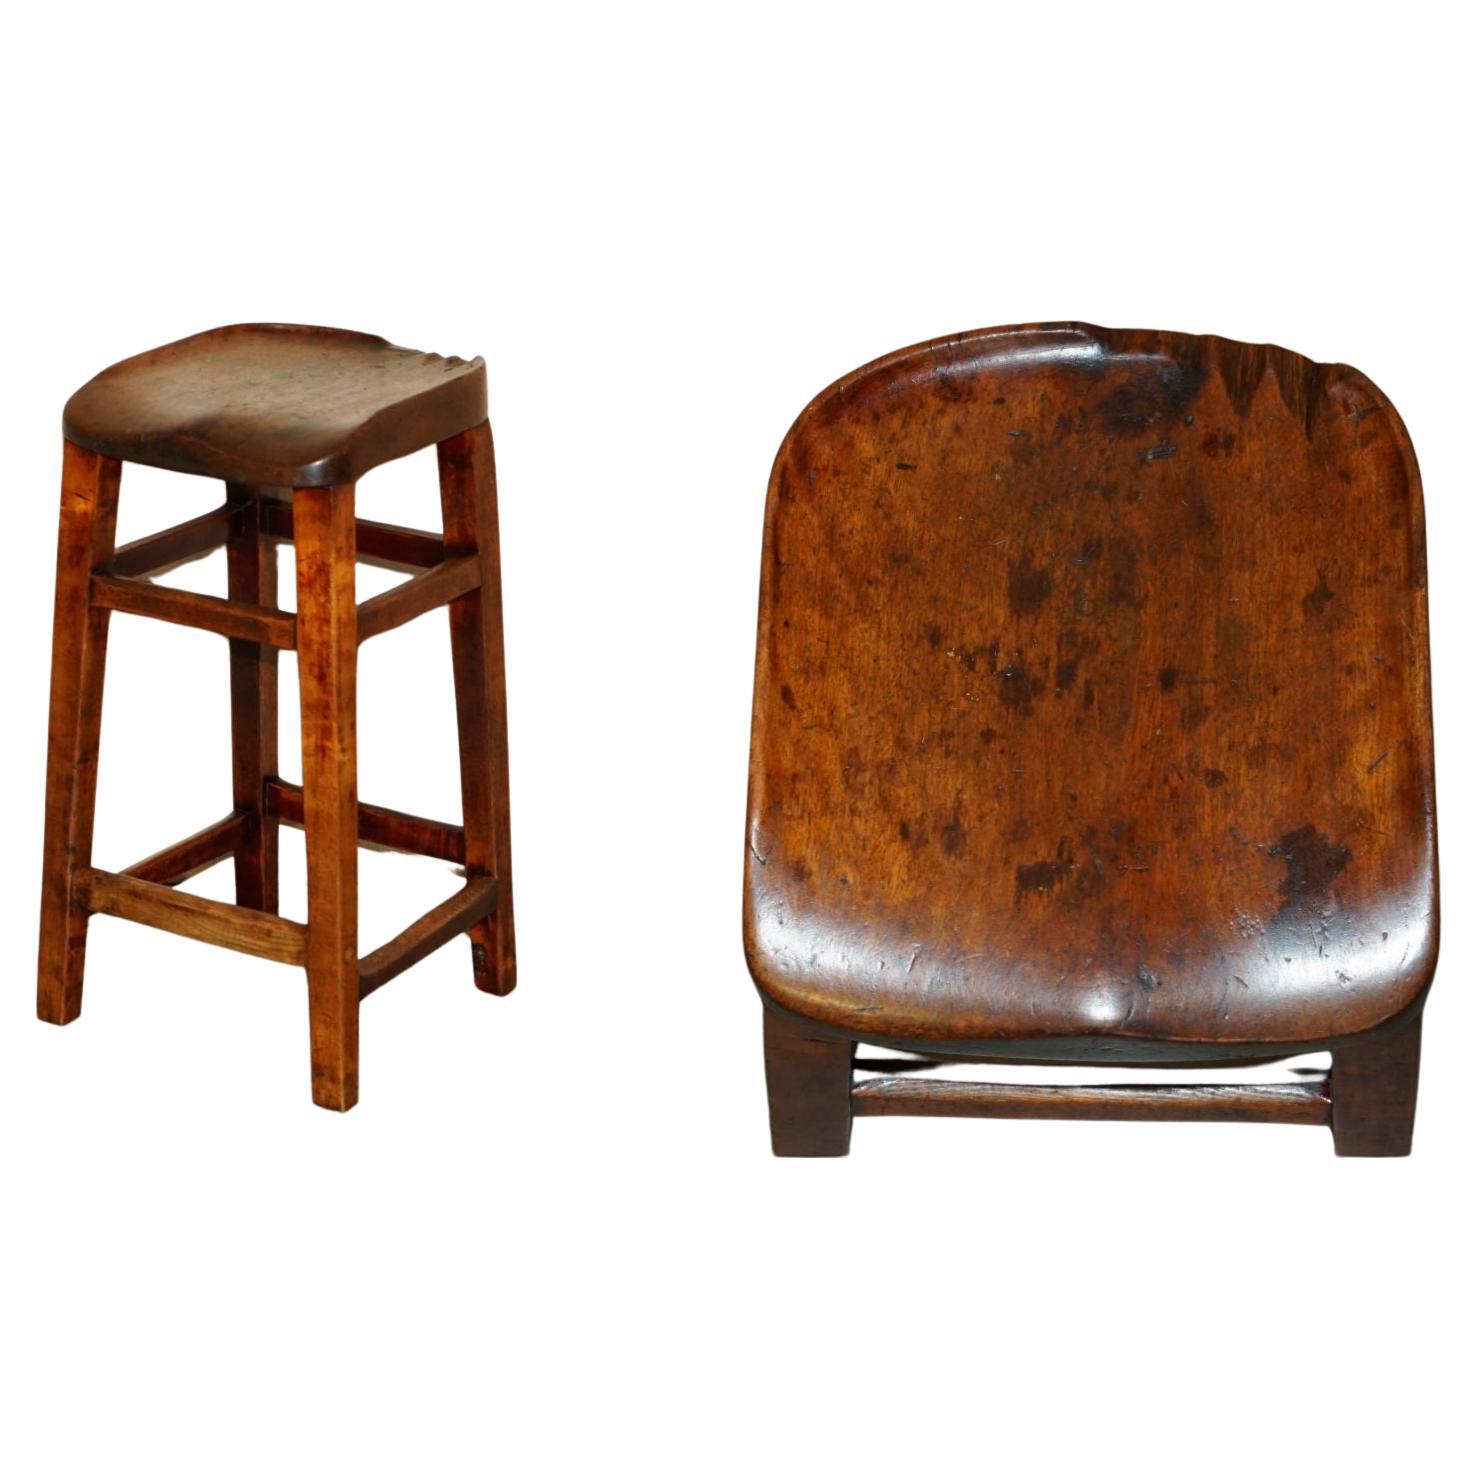 EXQUISITE CIRCA 1880 HAND MADE FRUiTWOOD DRAFTSMAN ARTIST STOOL STUNNING PATINA For Sale